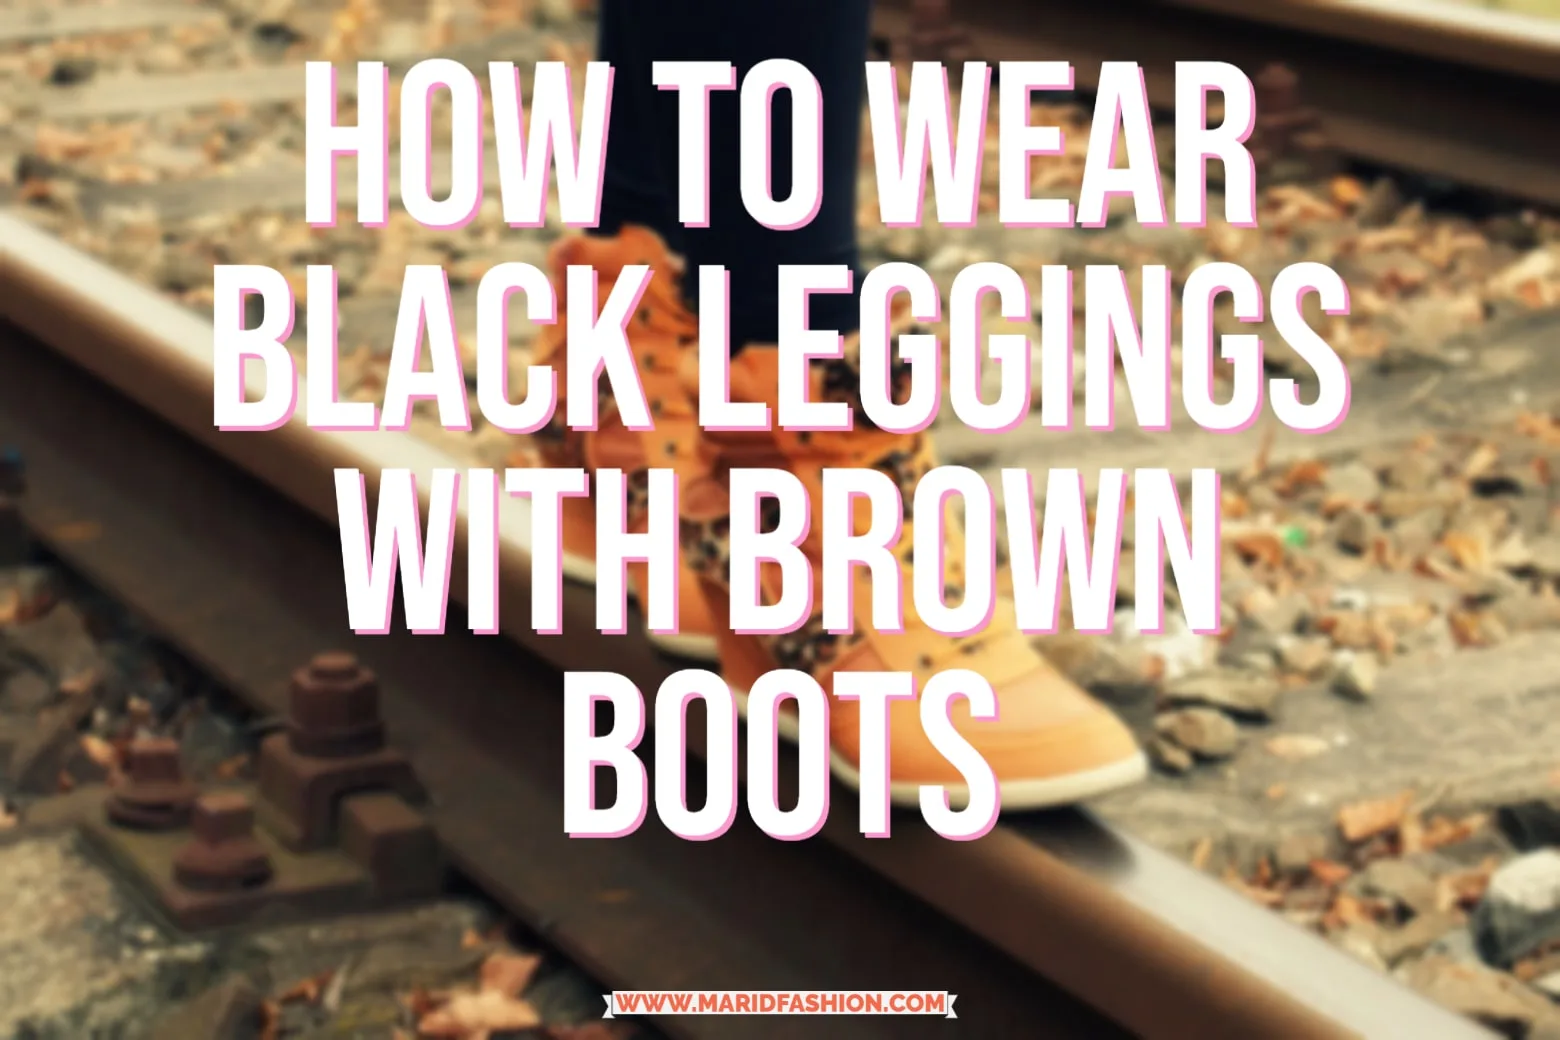 How to Wear Black Leggings With Brown Boots